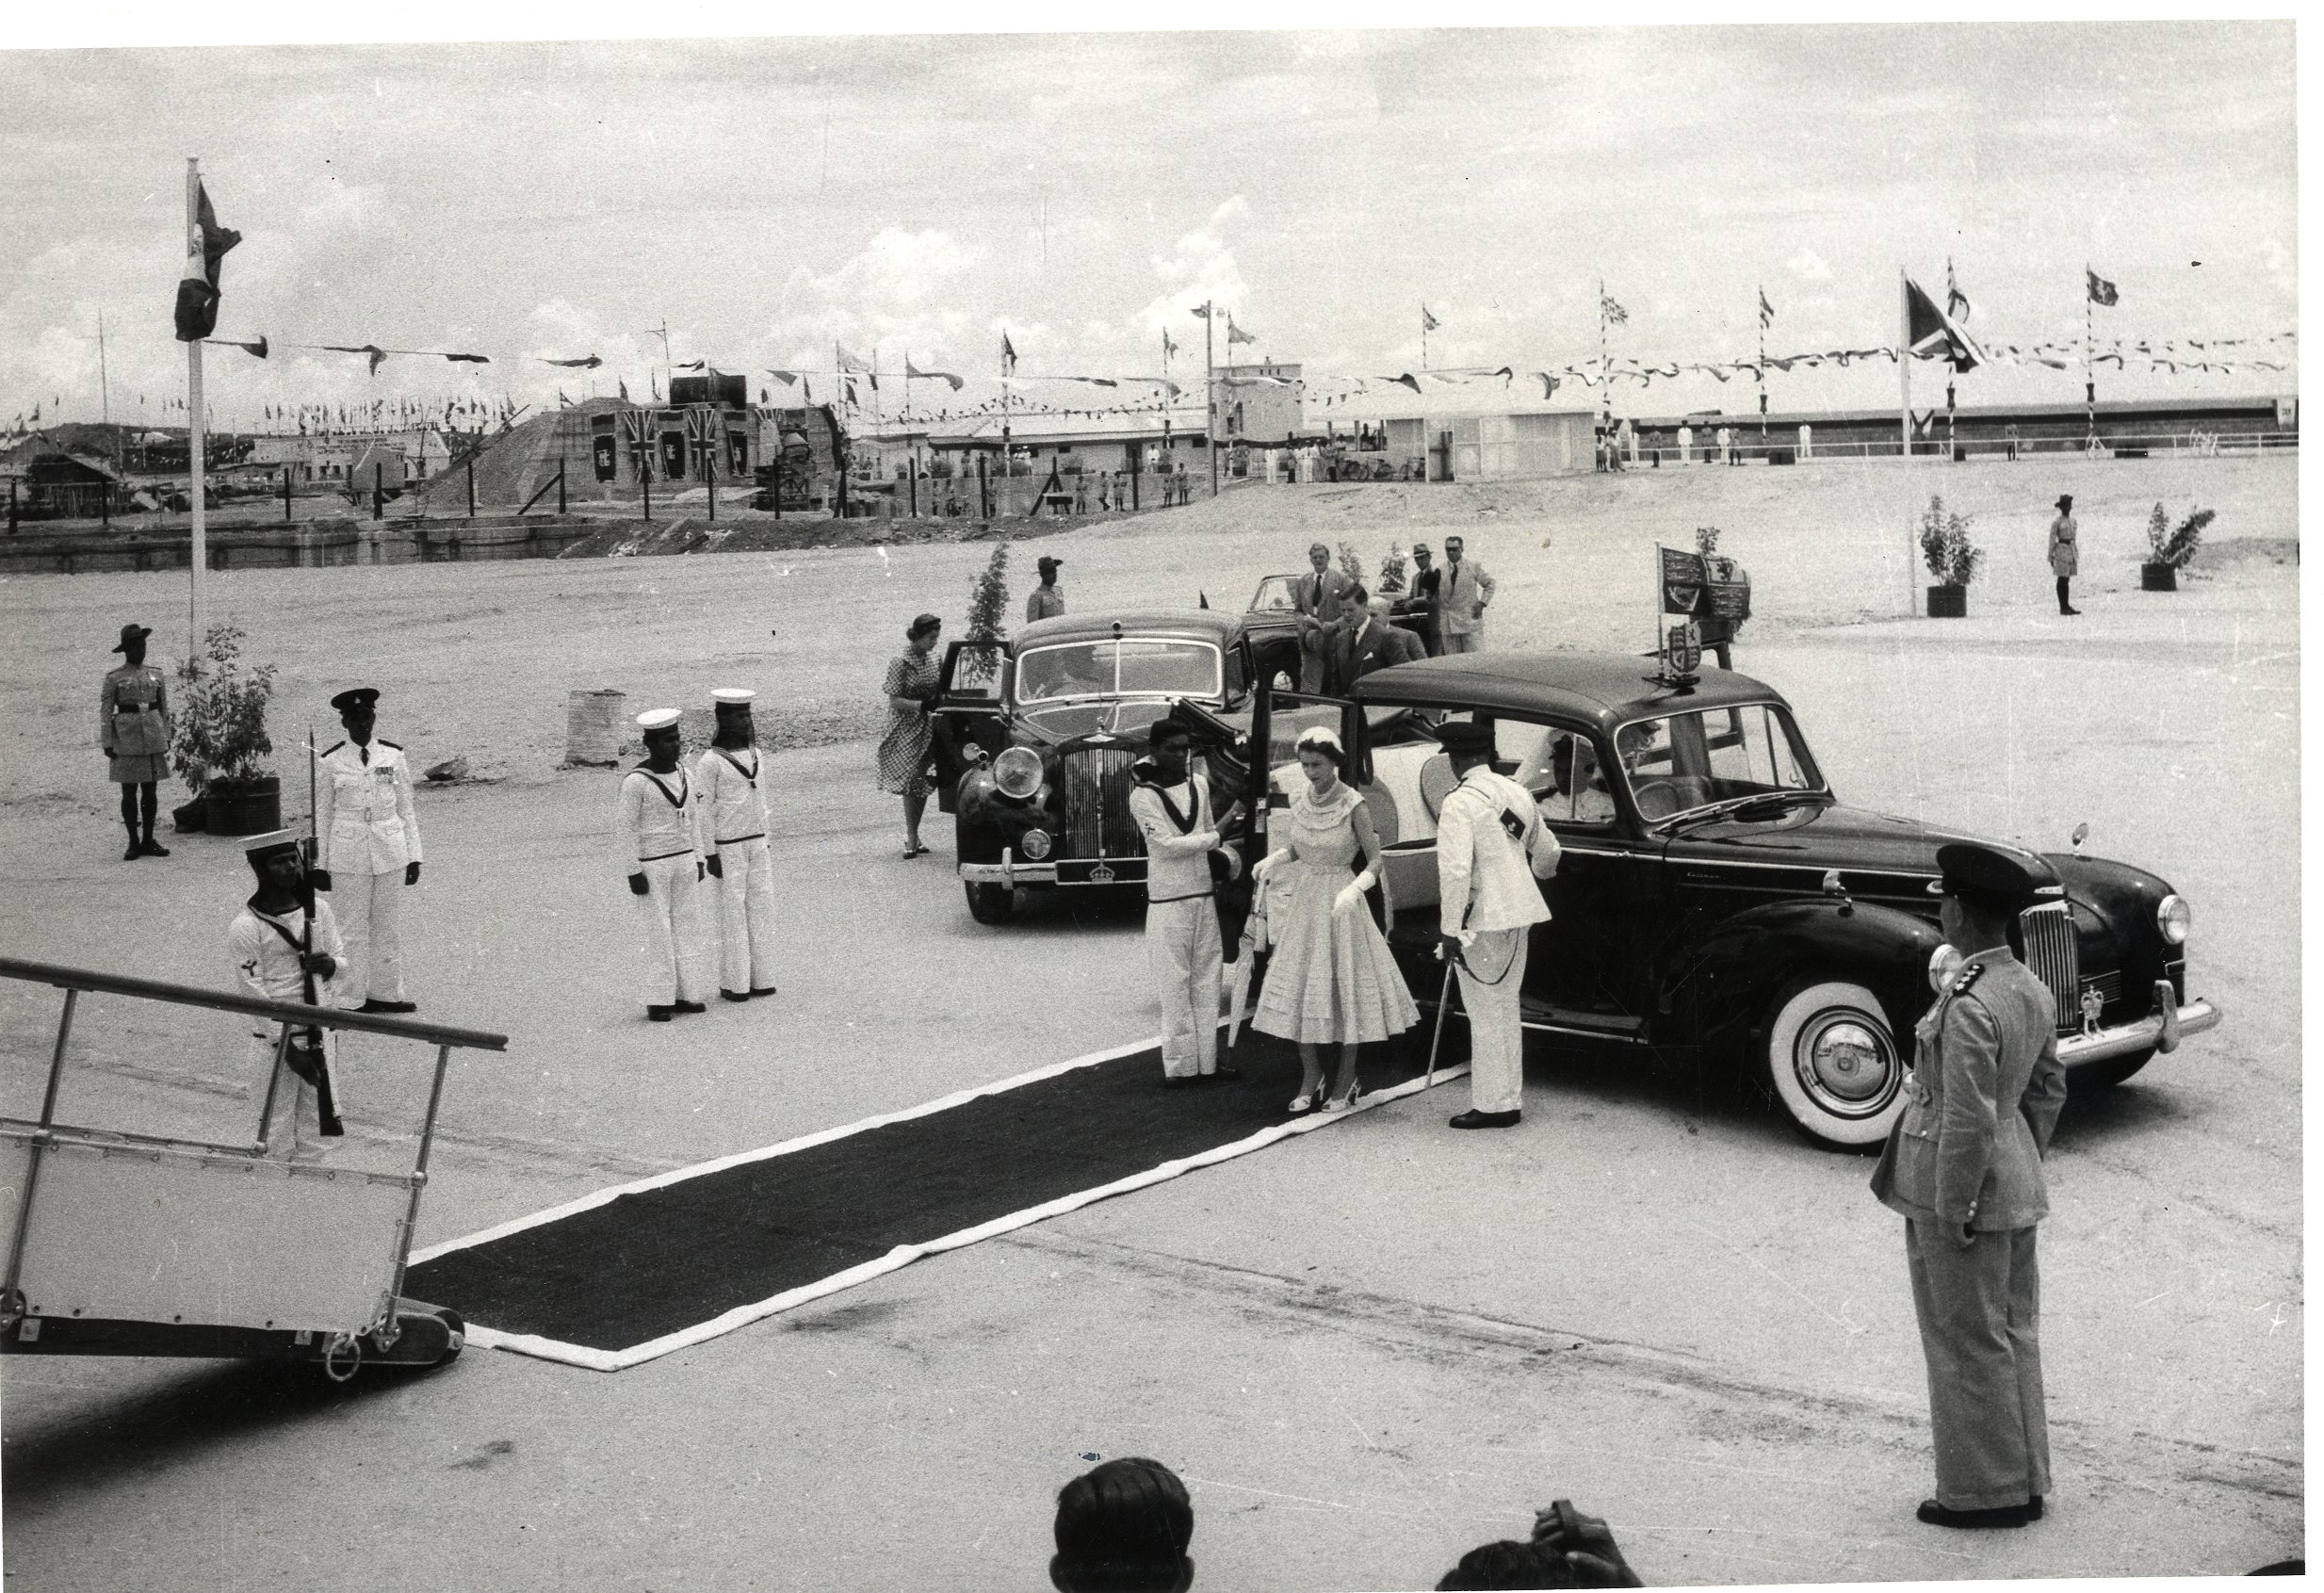 Queen Elizabeth II wearing a light summer dress, stepping out of the Humber Pullman Landaulette onto a carpet as a man holds open the door for her. Other men attend around the carpet and a ramp front left. Behind them is a large, flat expanse of ground. 